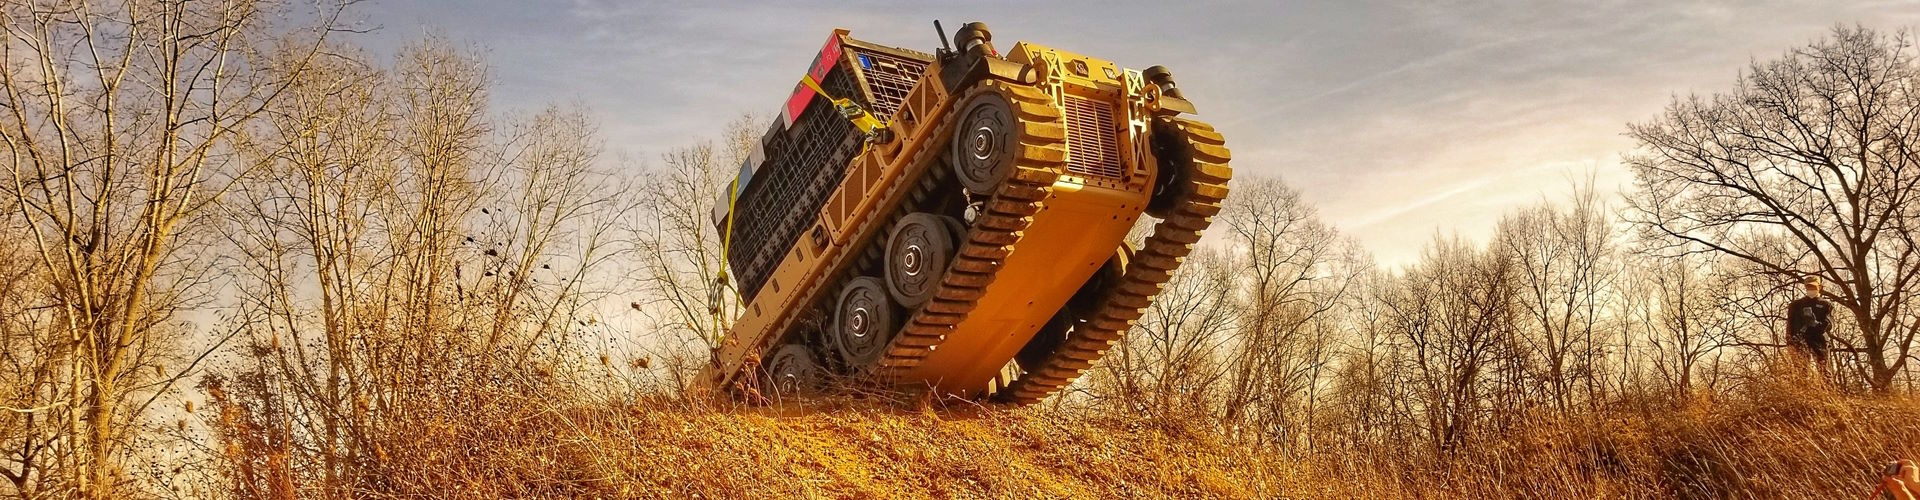 U.S. Army Robotic Combat Vehicle driving over a hill